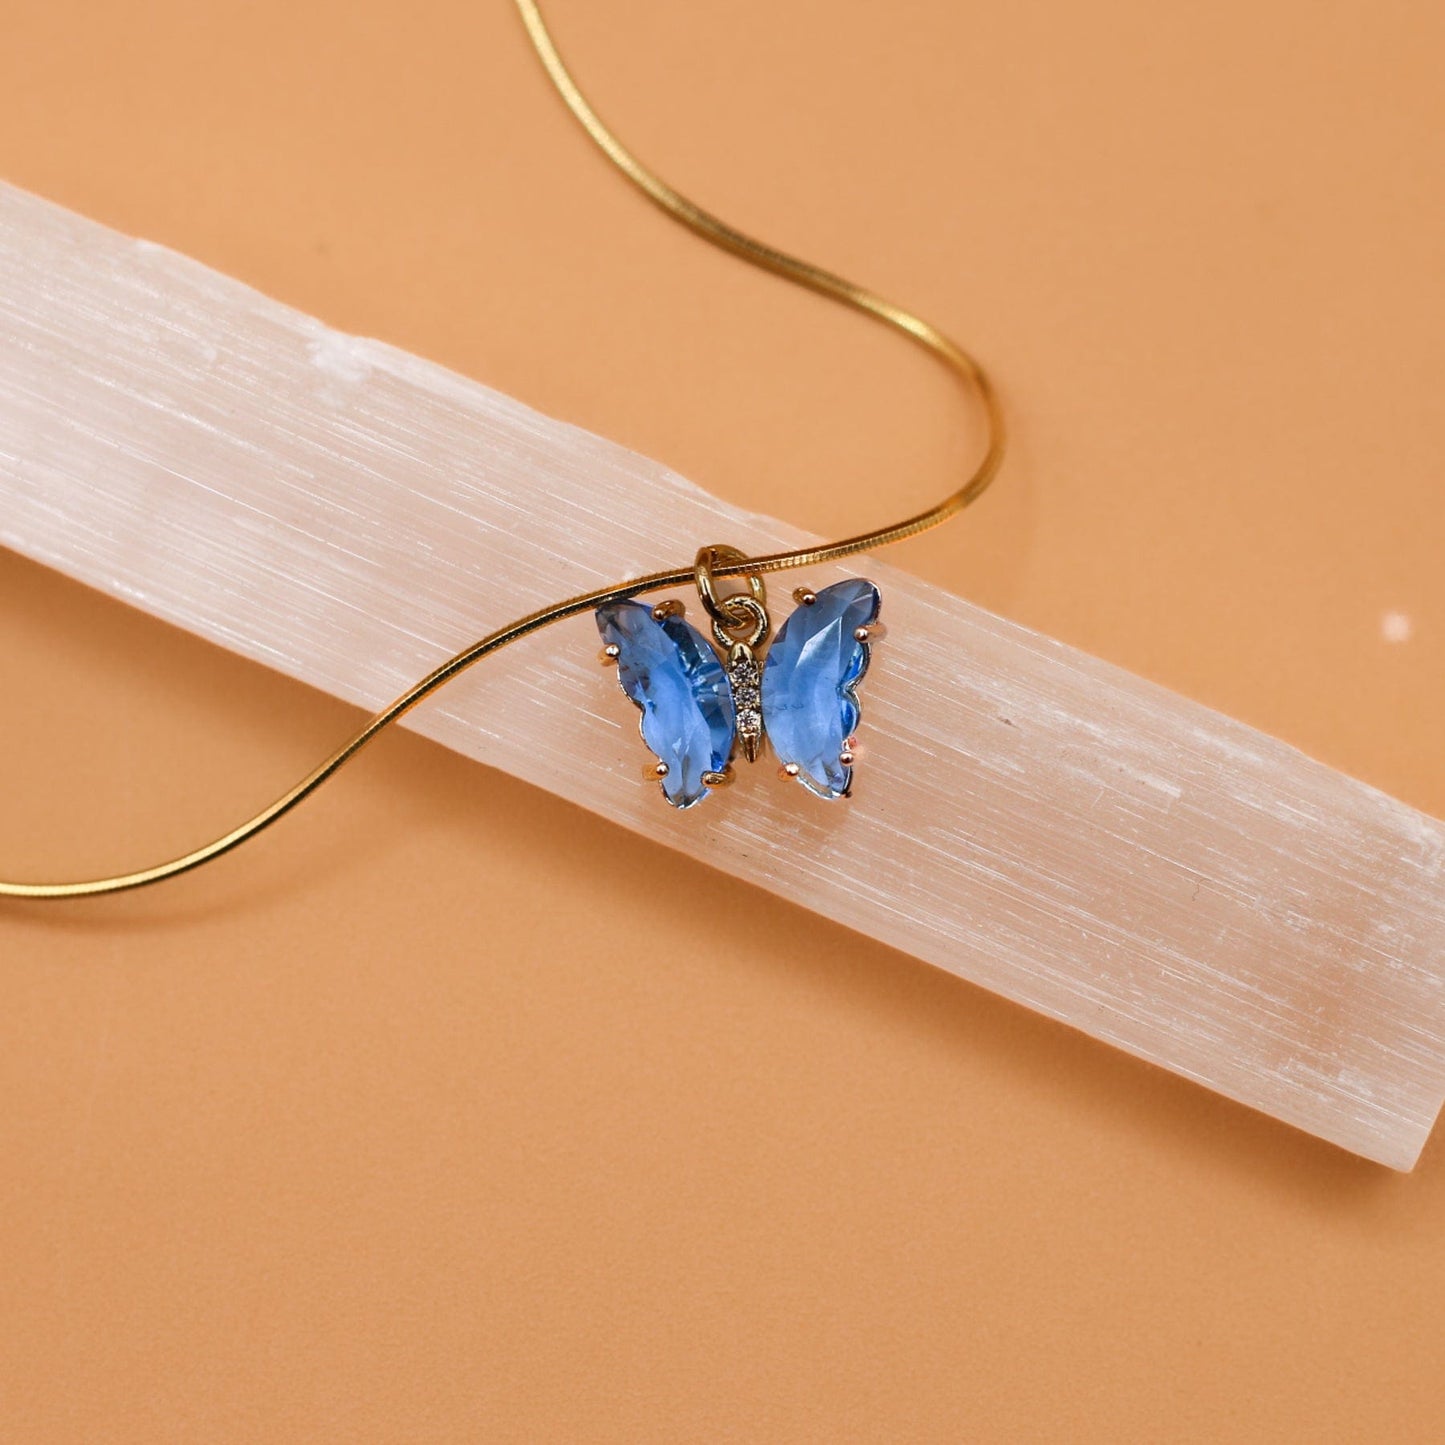 Your Story Matters Butterfly Crystal Necklace Dainty Necklace